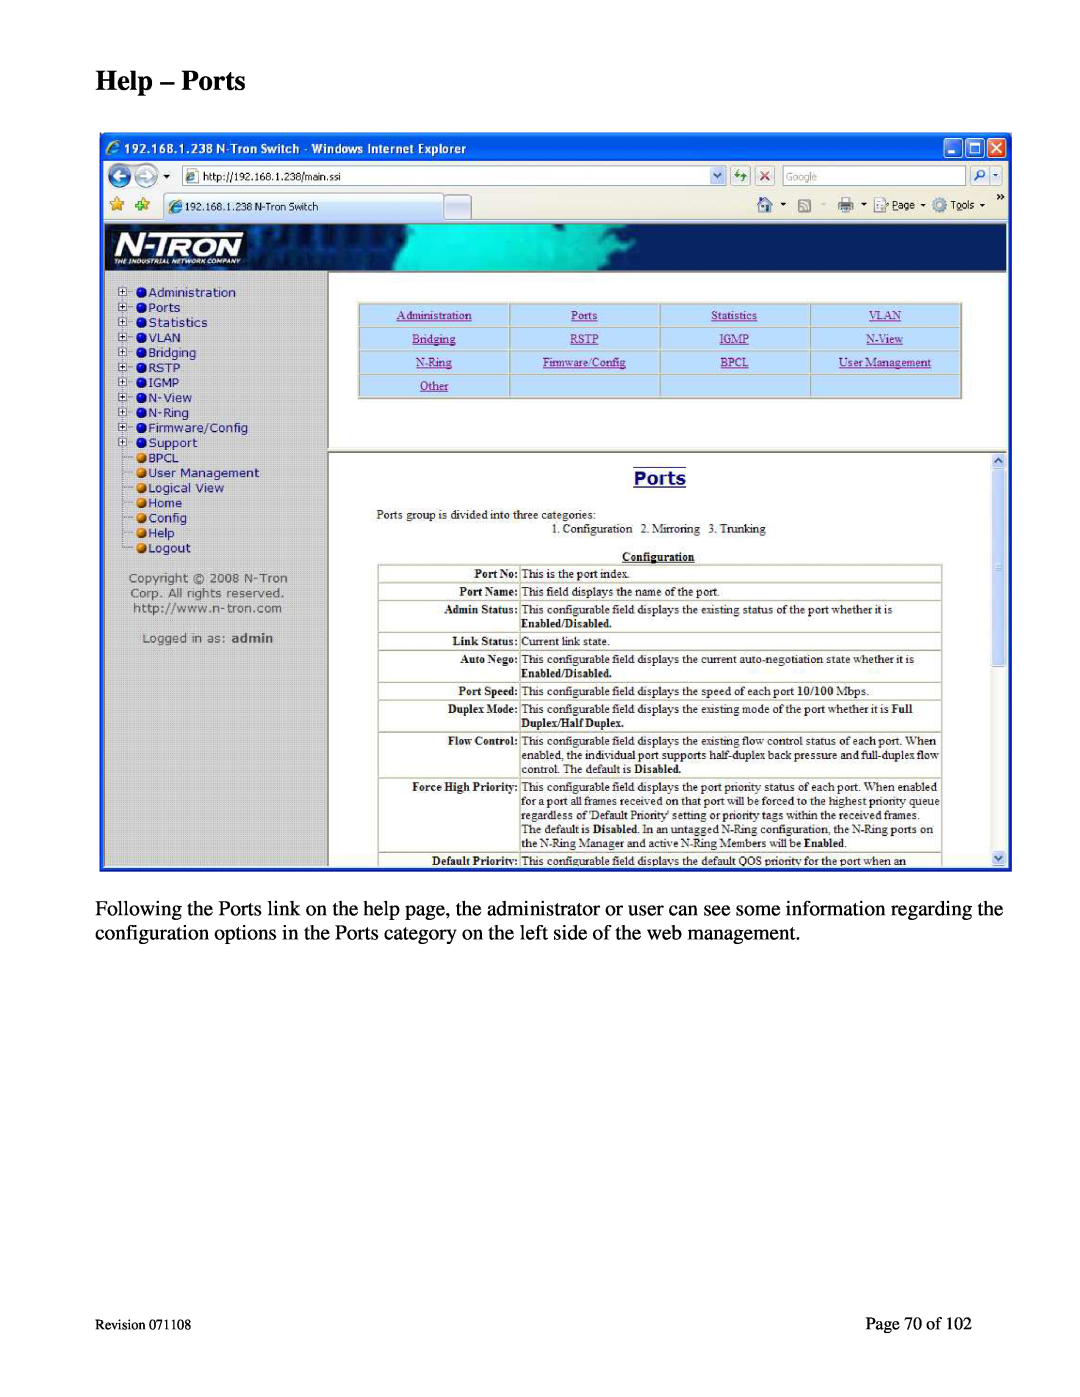 N-Tron 708M12 user manual Help - Ports, Page 70 of, Revision 